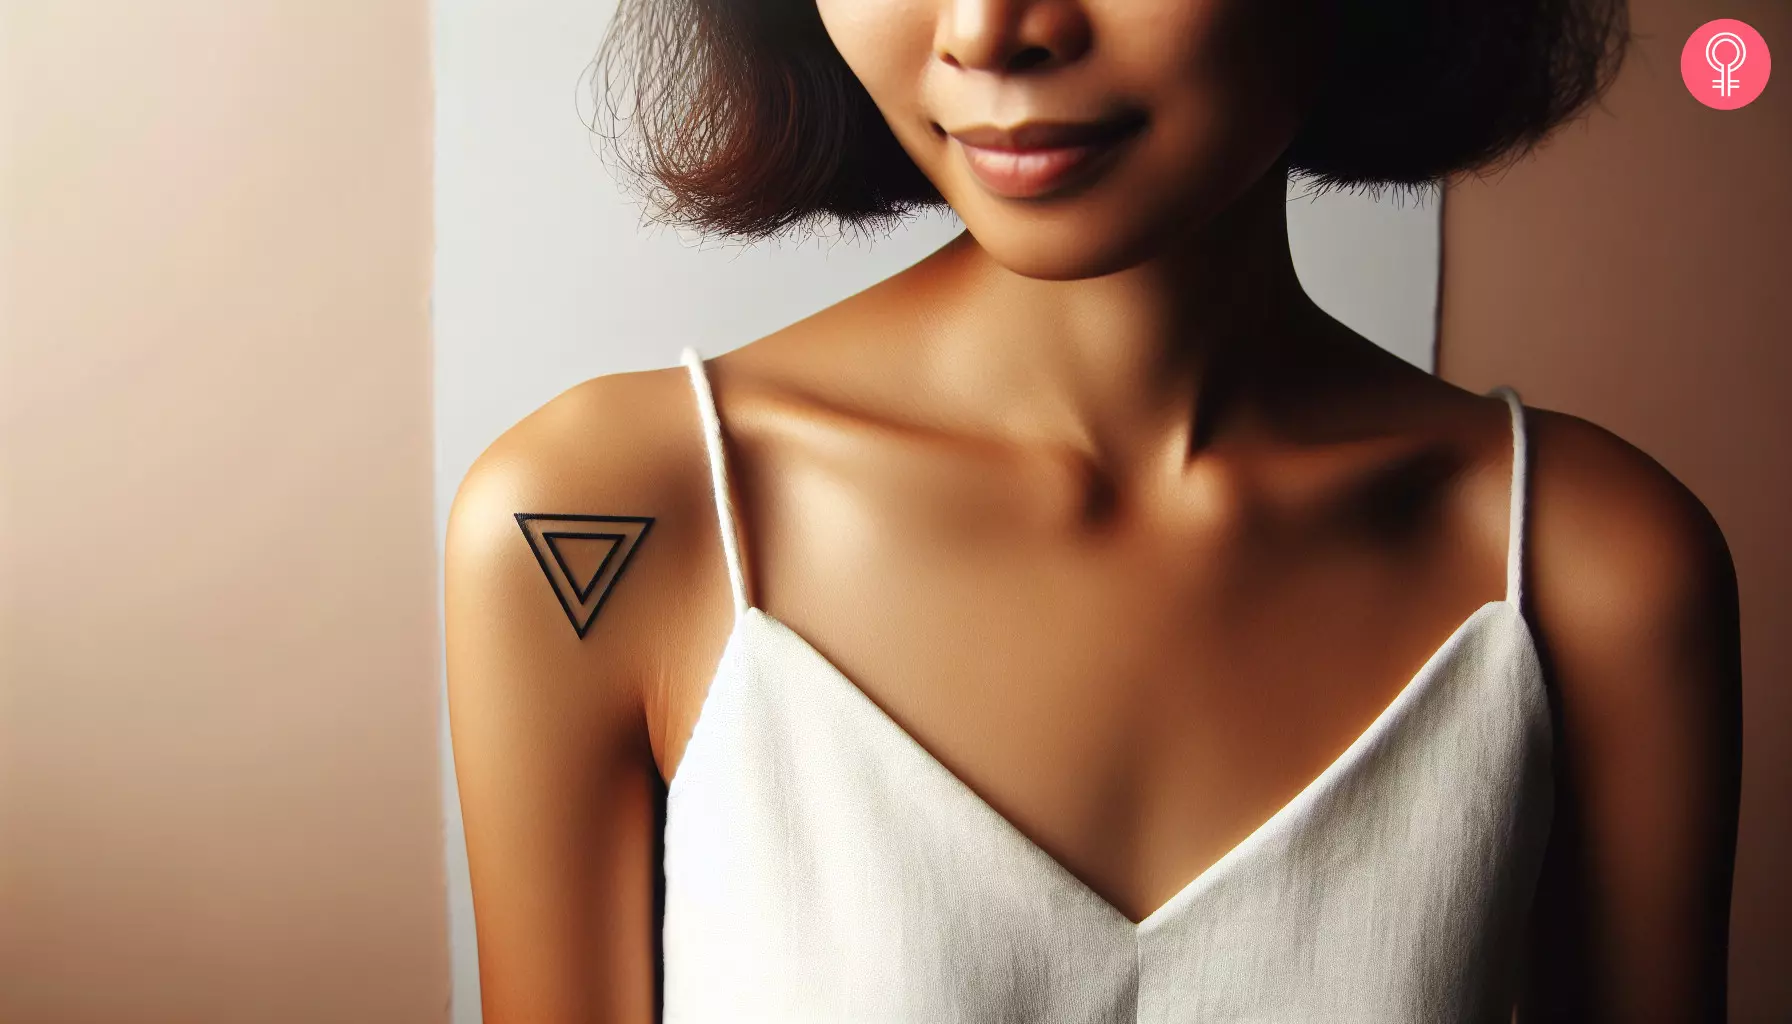 A woman with an upside-down triangle tattoo on her shoulder